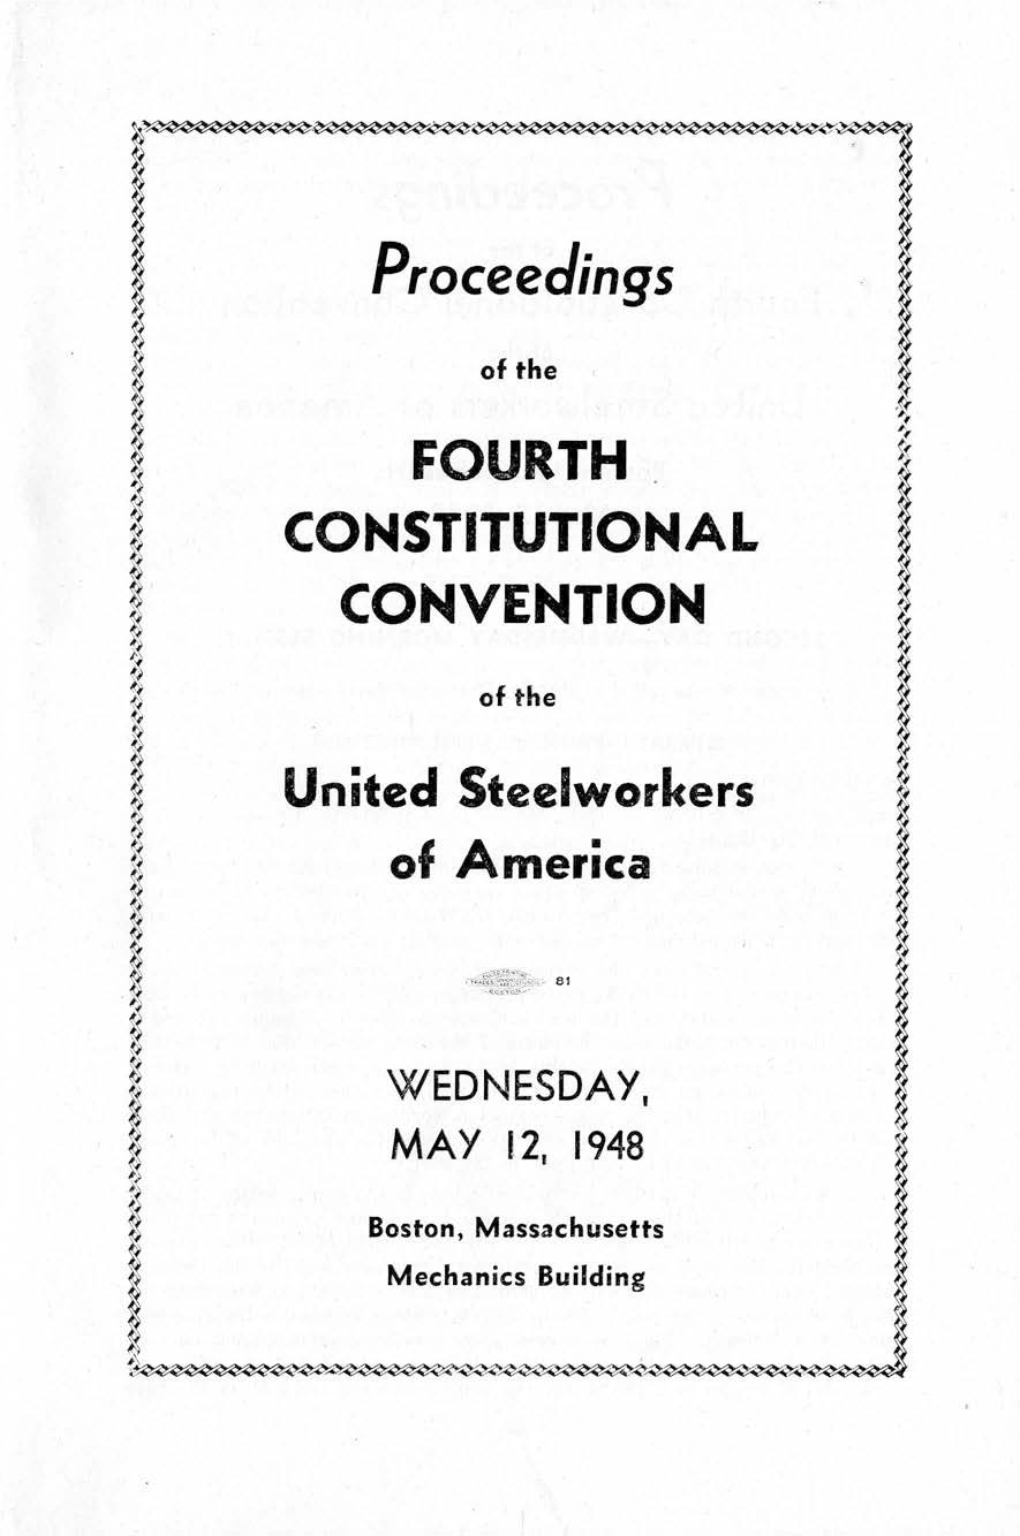 United Steelworkers, 4Th Constitutional Convention, Boston, May 12, 1948